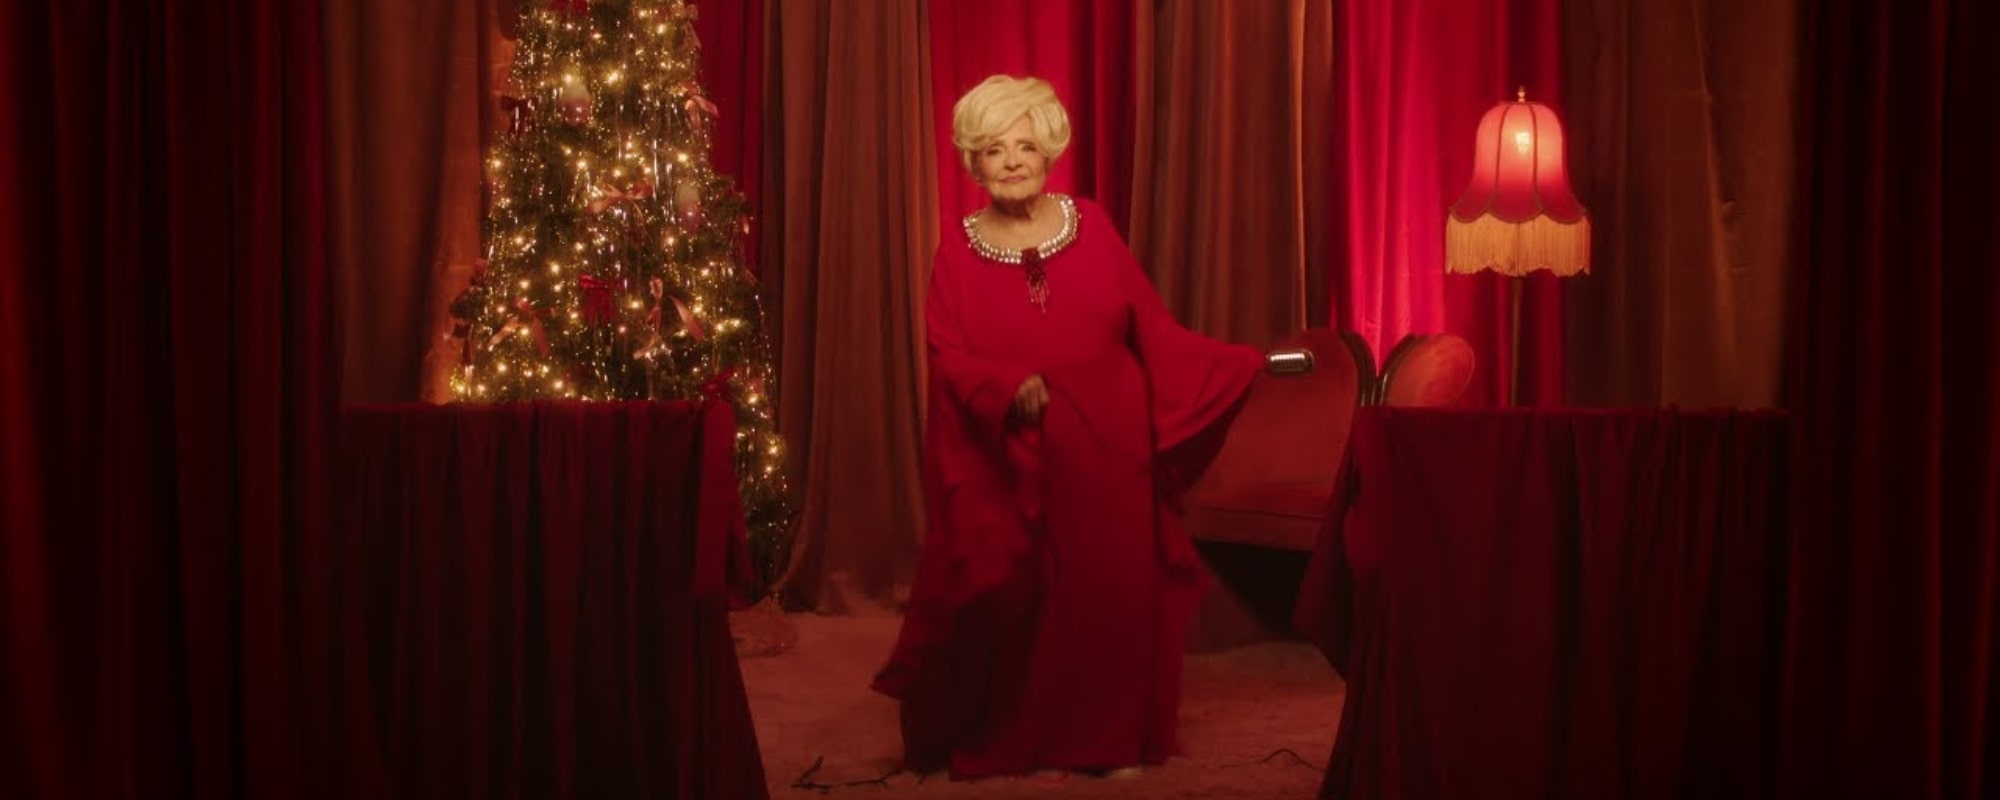 Brenda Lee Breaks Numerous Records as “Rockin’ Around the Christmas Tree” Tops the Billboard Hot 100 Chart